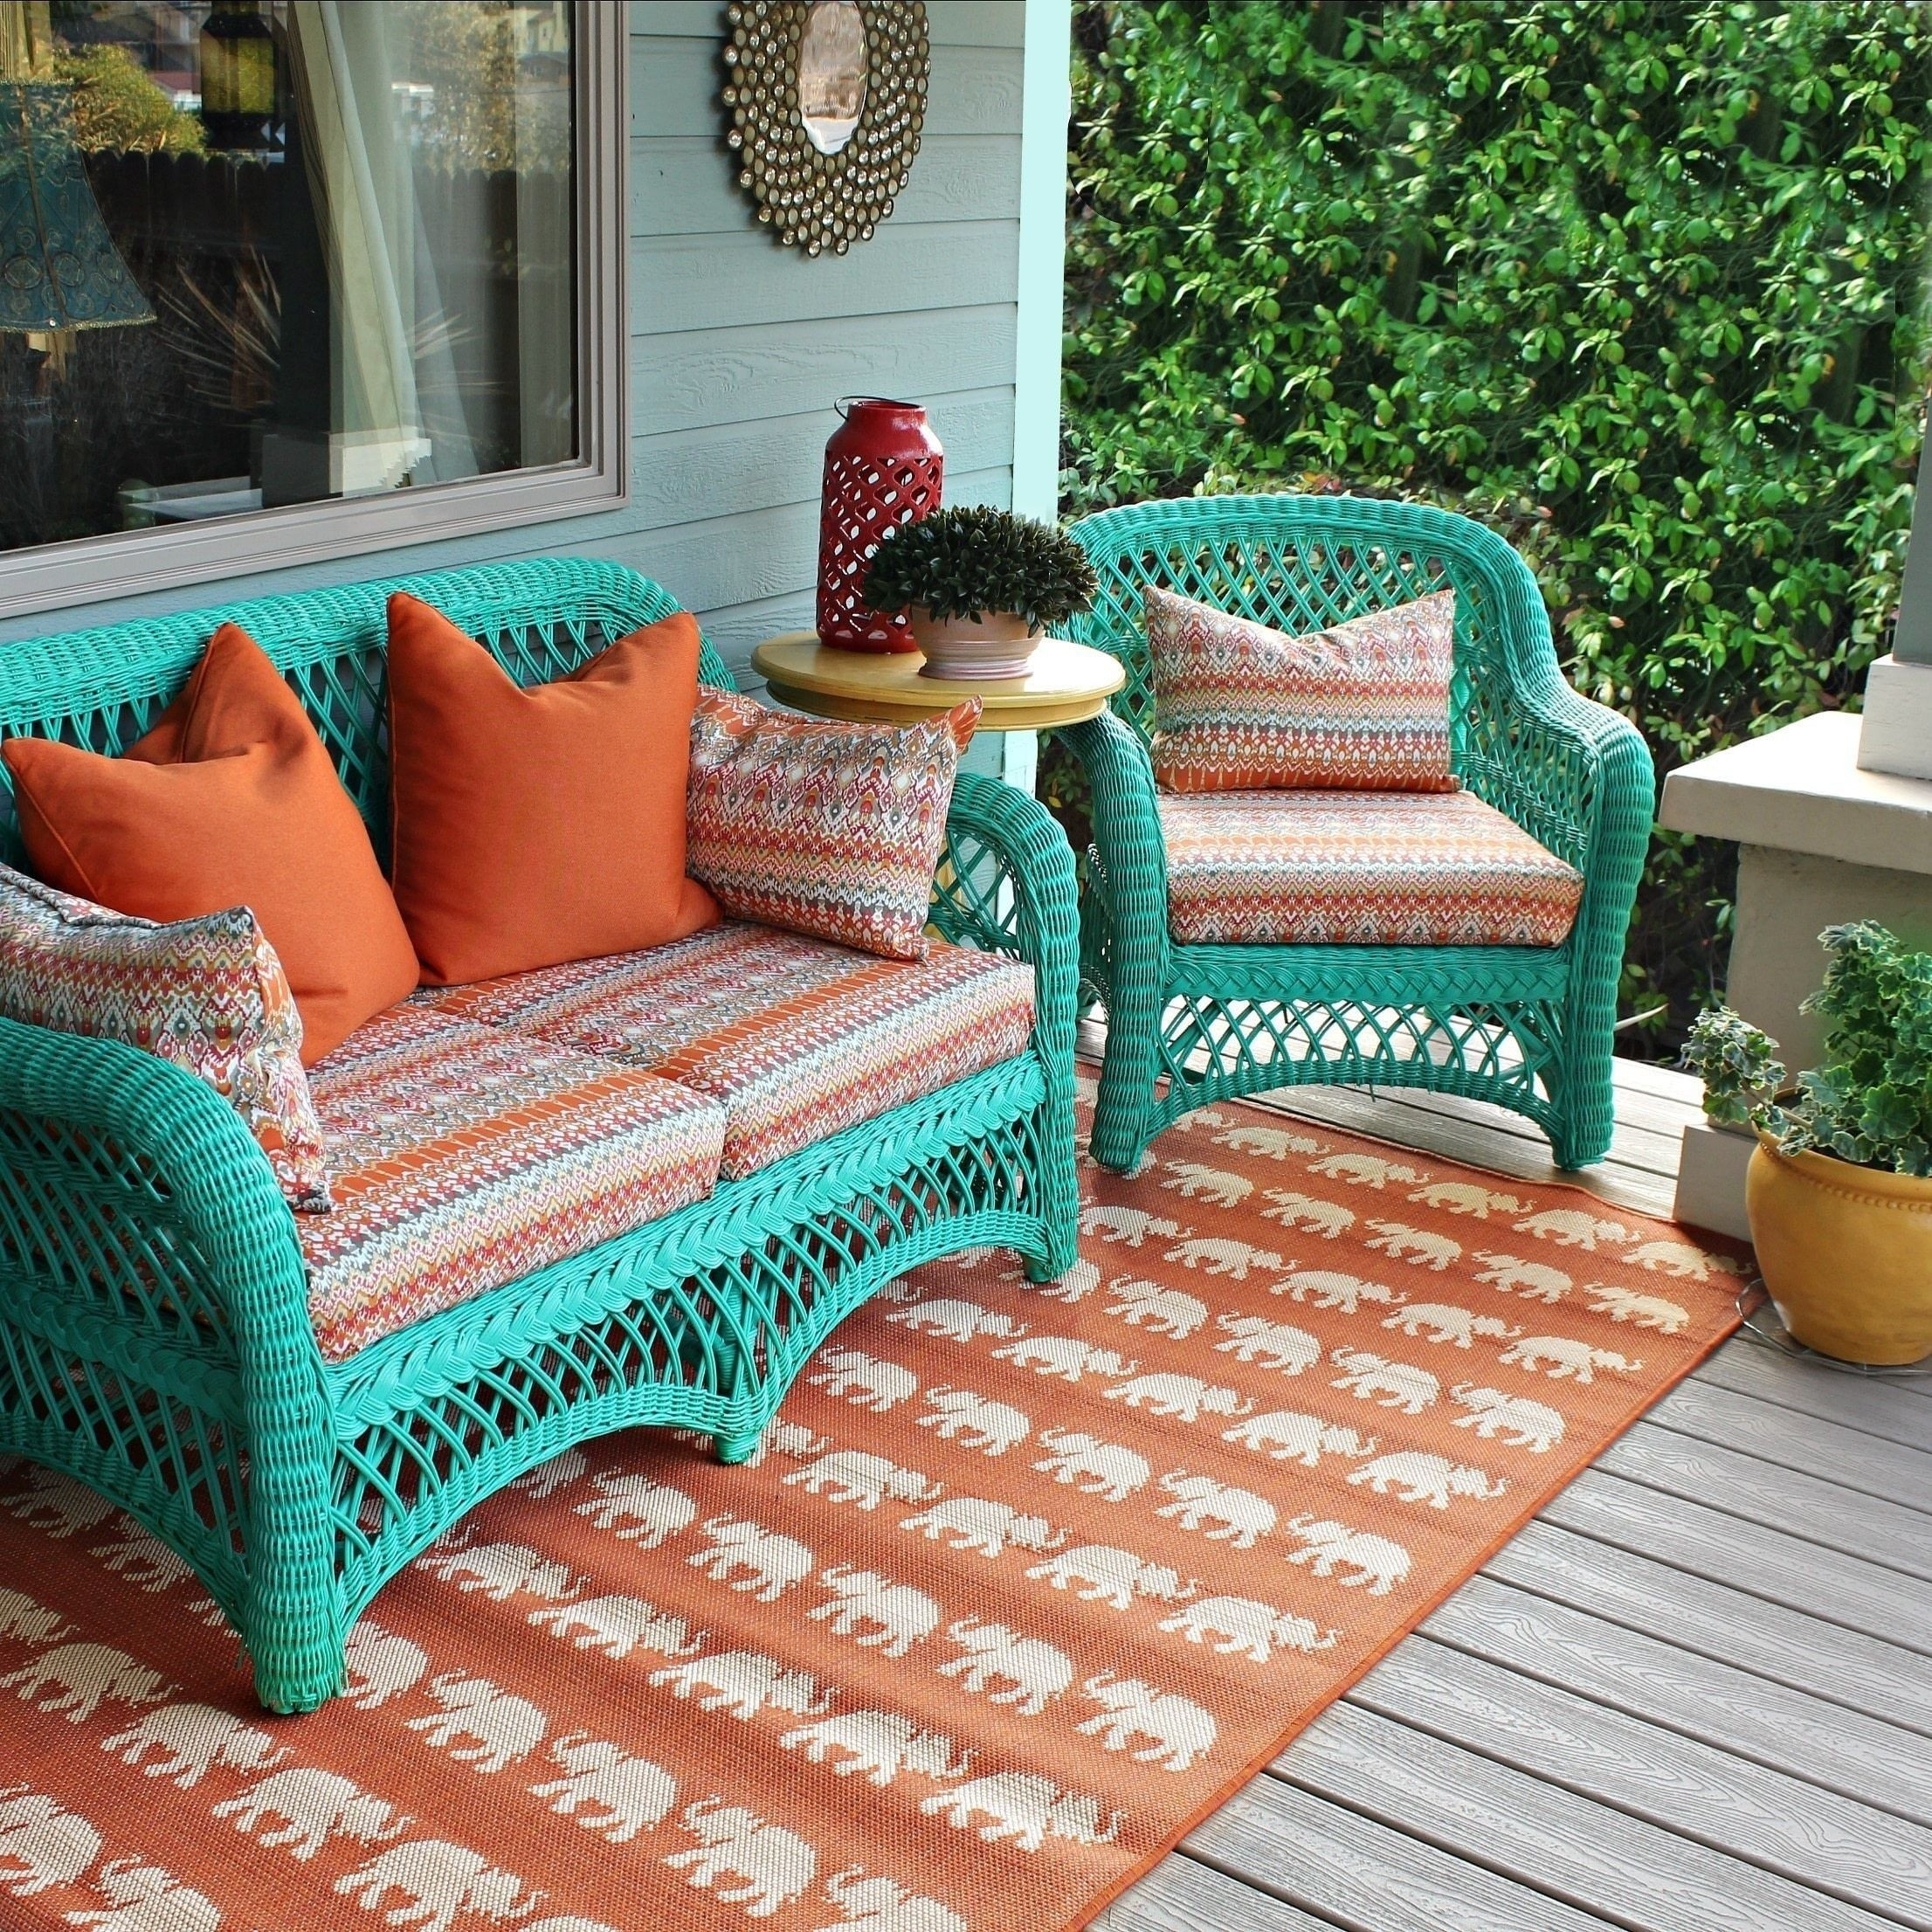 DIY Outdoor Cushions No Sew
 No Sew Patio Cushions And Pillows